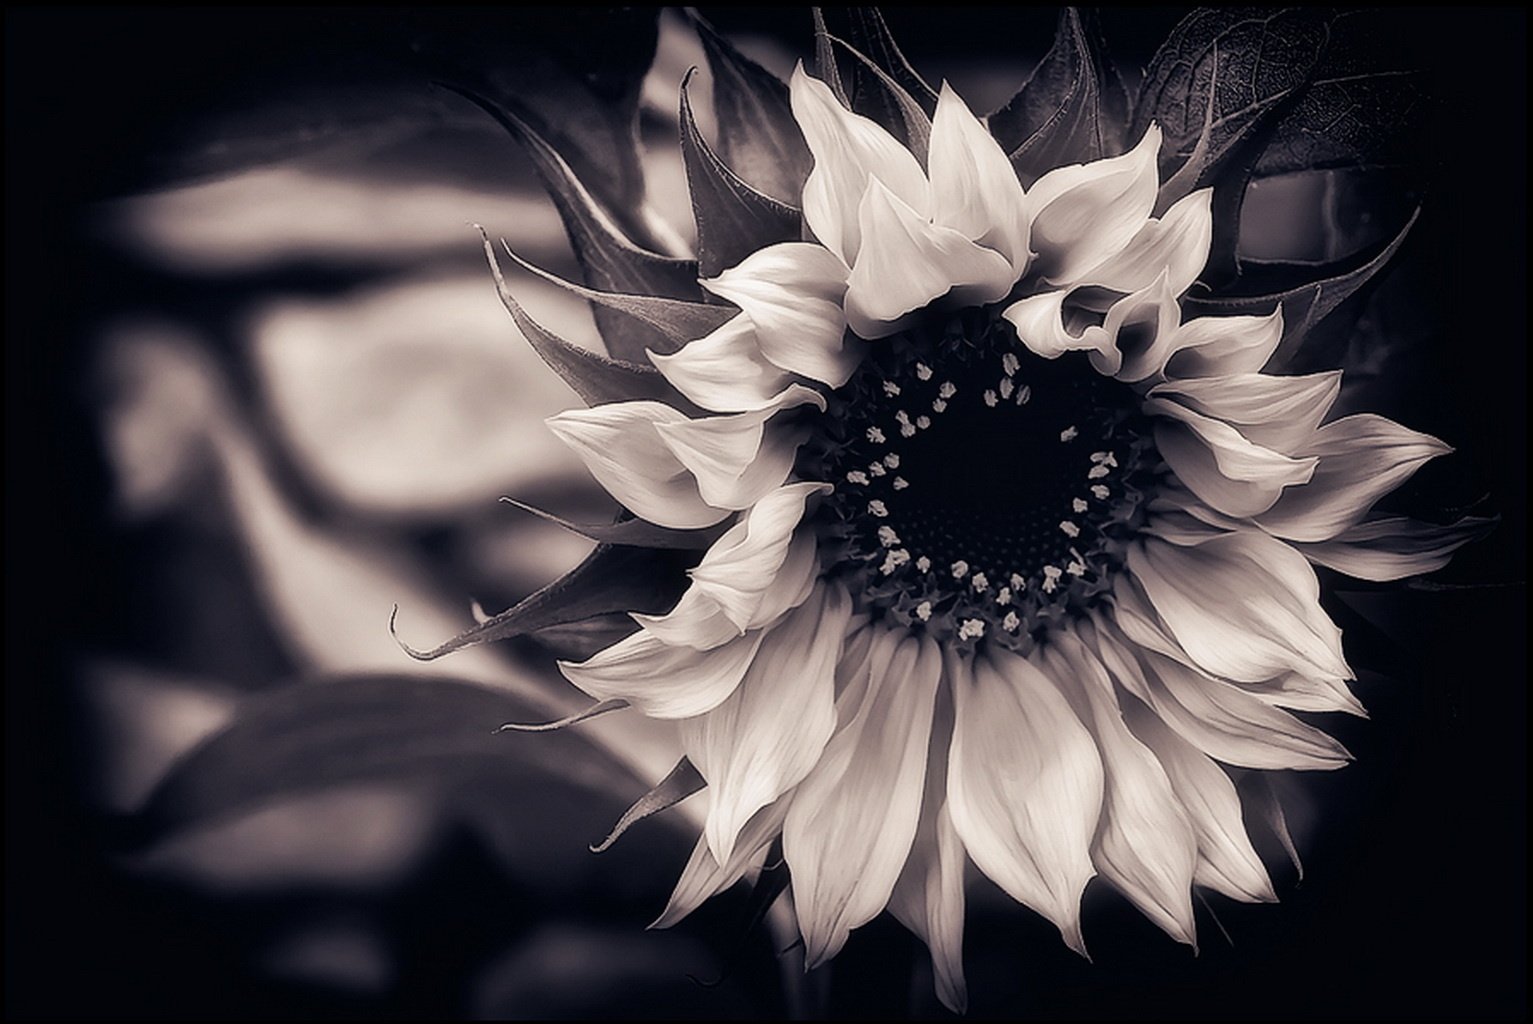 Wallpaper Download Wallpaper Sunflower Black And White Background